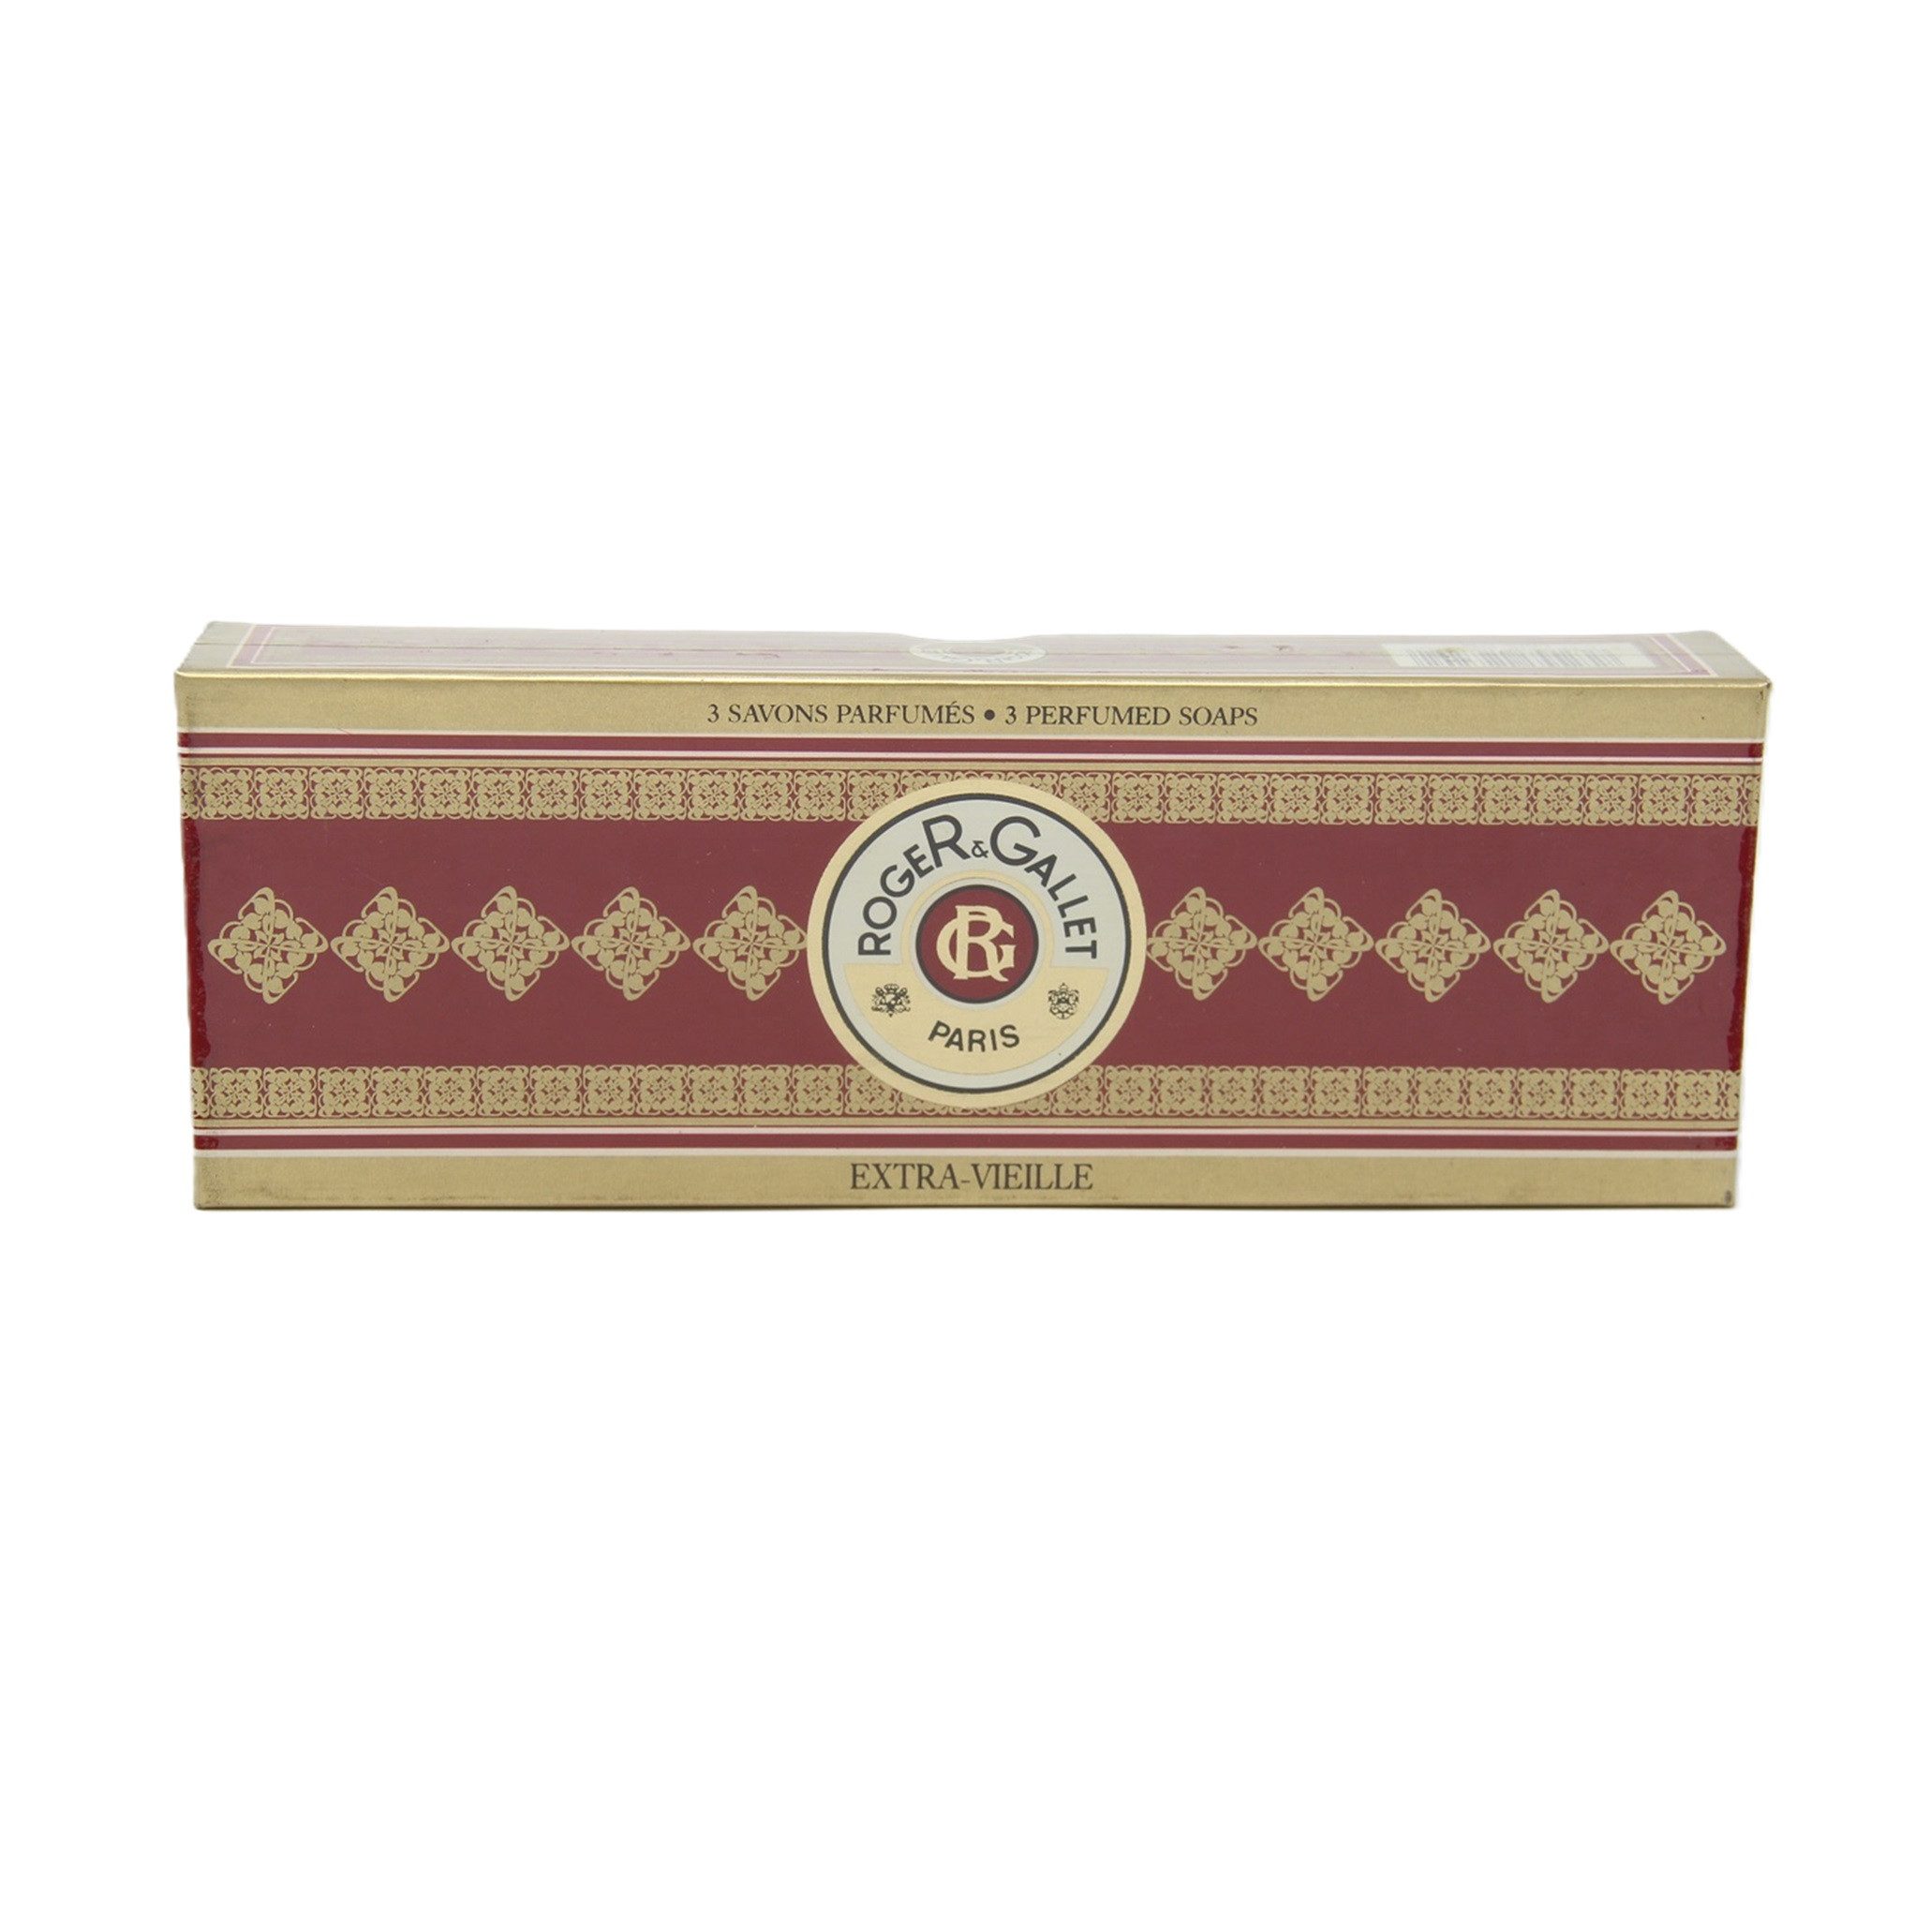 ROGER & GALLET Handseife Roger & Gallet Extra Vieille 3 perfumed soaps Seife 3x100g